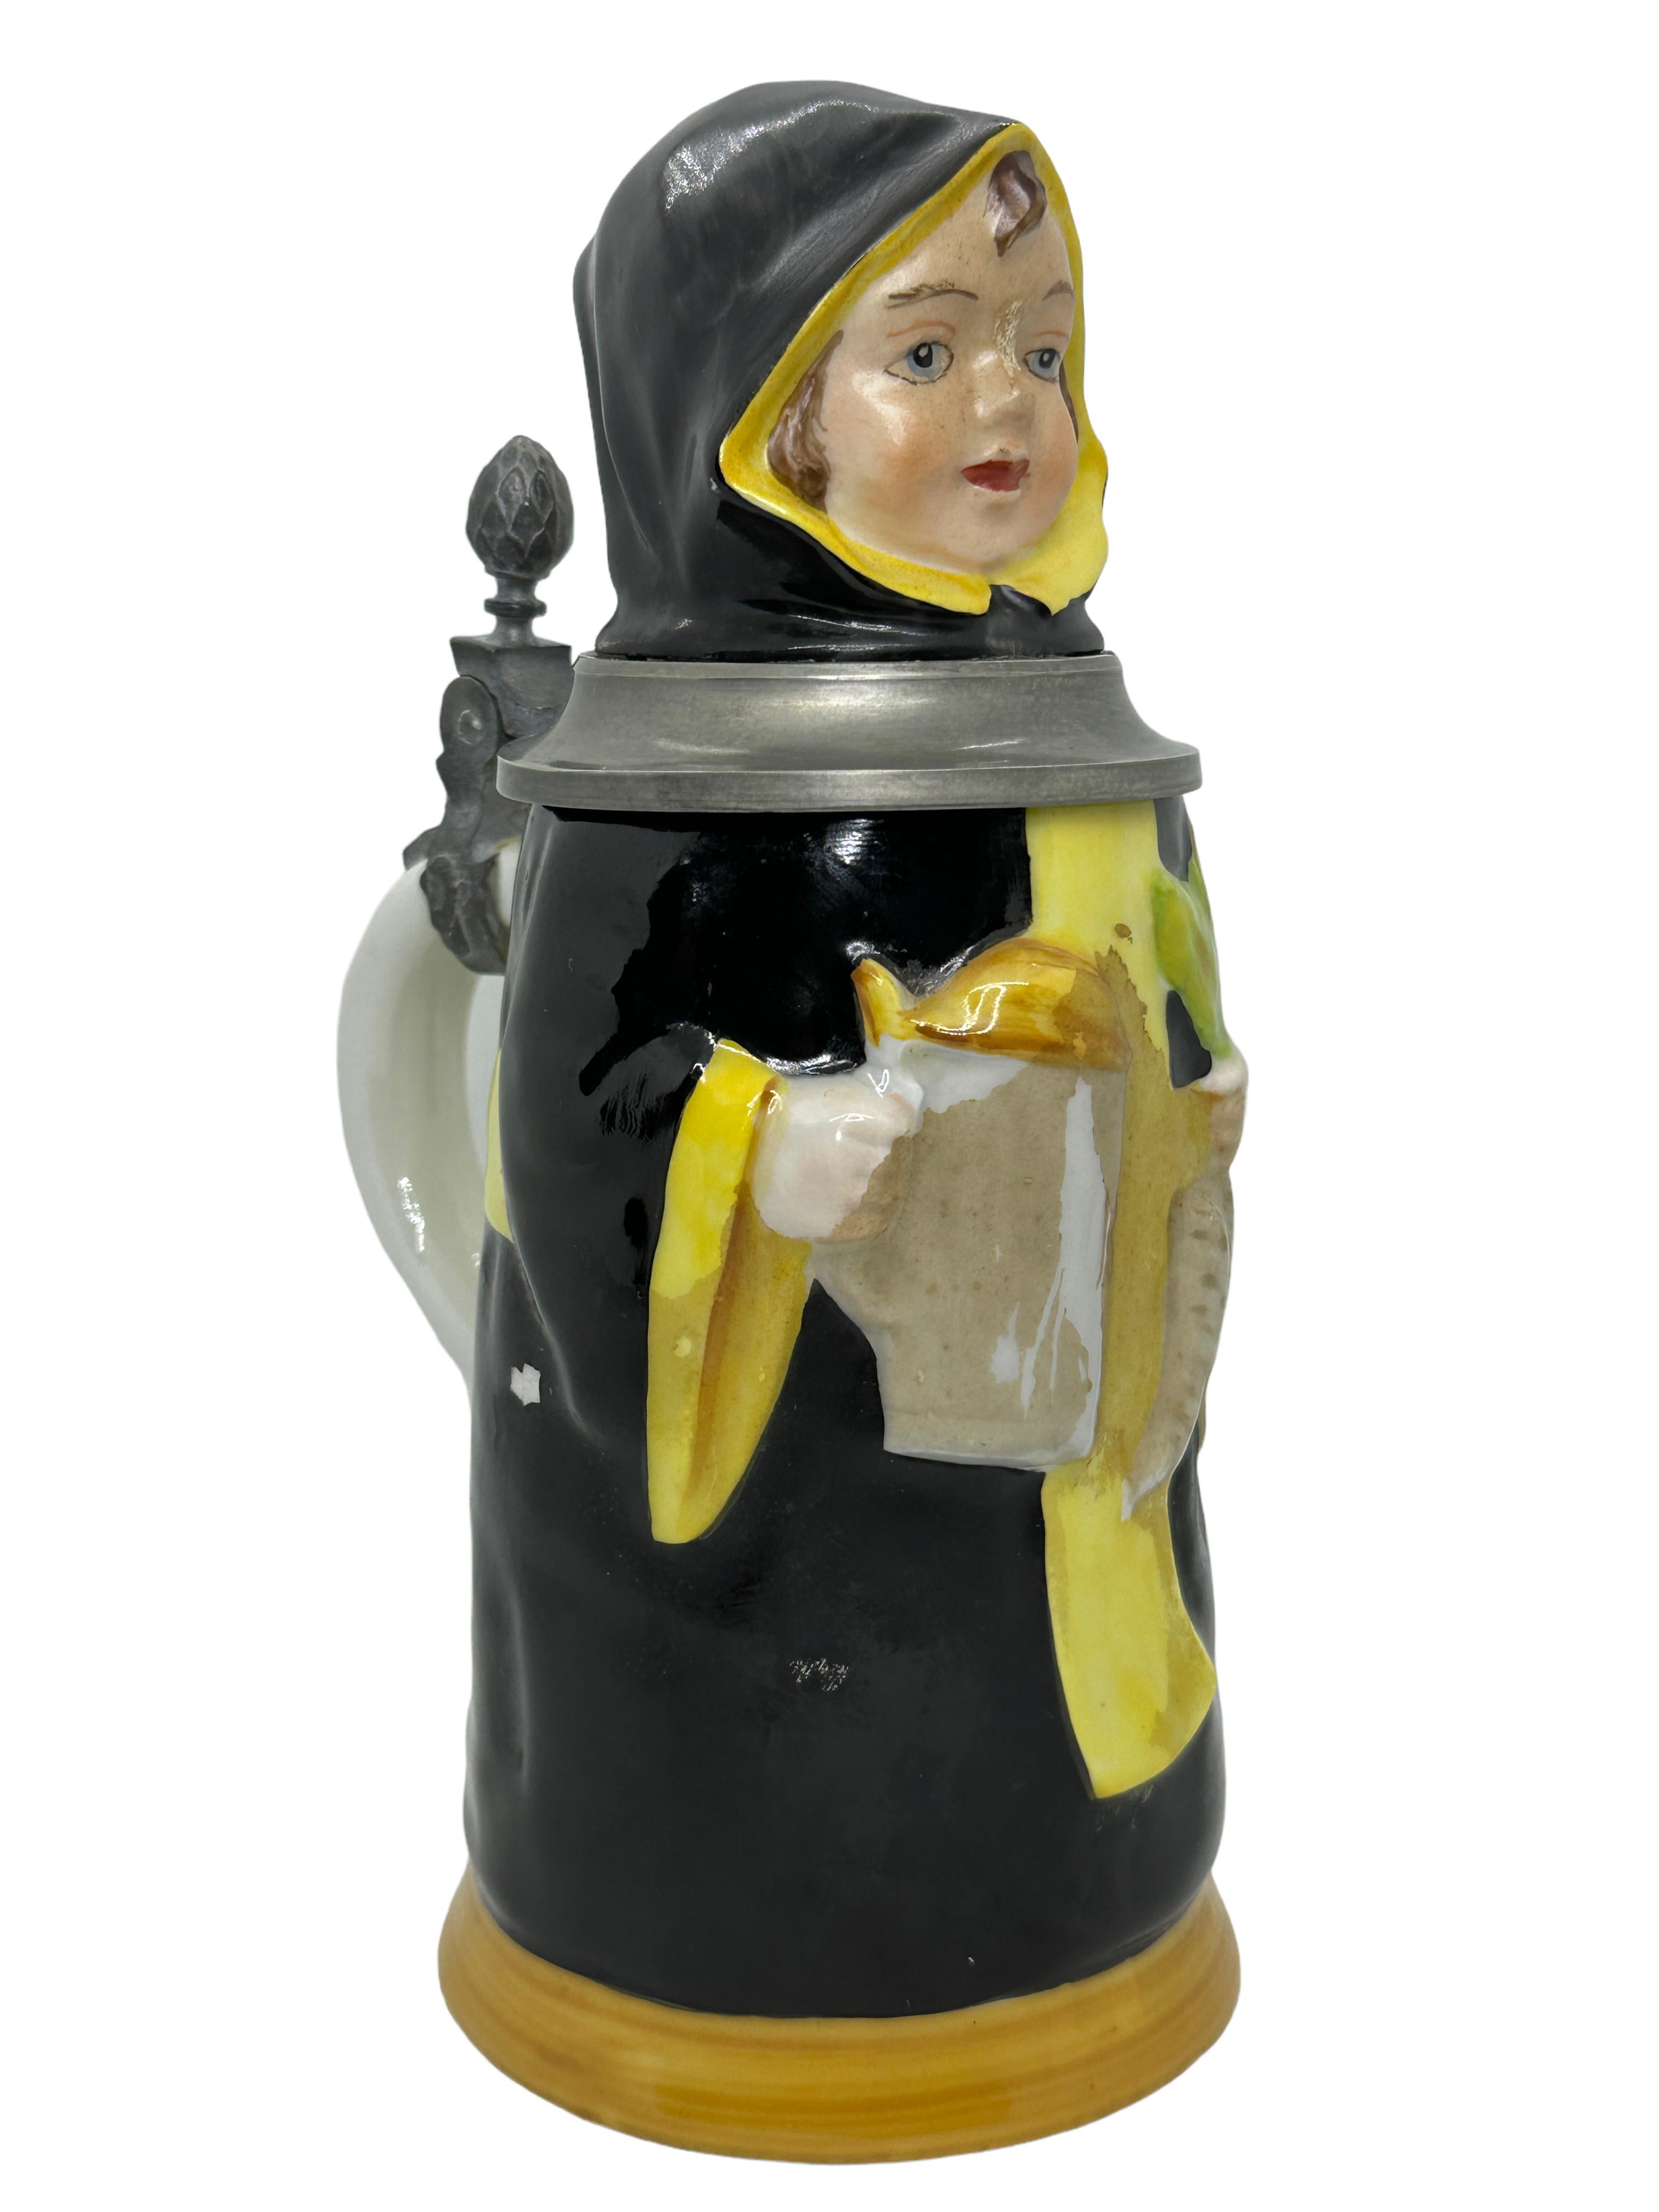 A gorgeous character beer stein - Munich Child. This character beer stein has been made in Germany circa 1930s or older, attributed to E. Bohne, Thuringia Germany. Absolutely gorgeous piece hand painted and still in great condition. Lid works